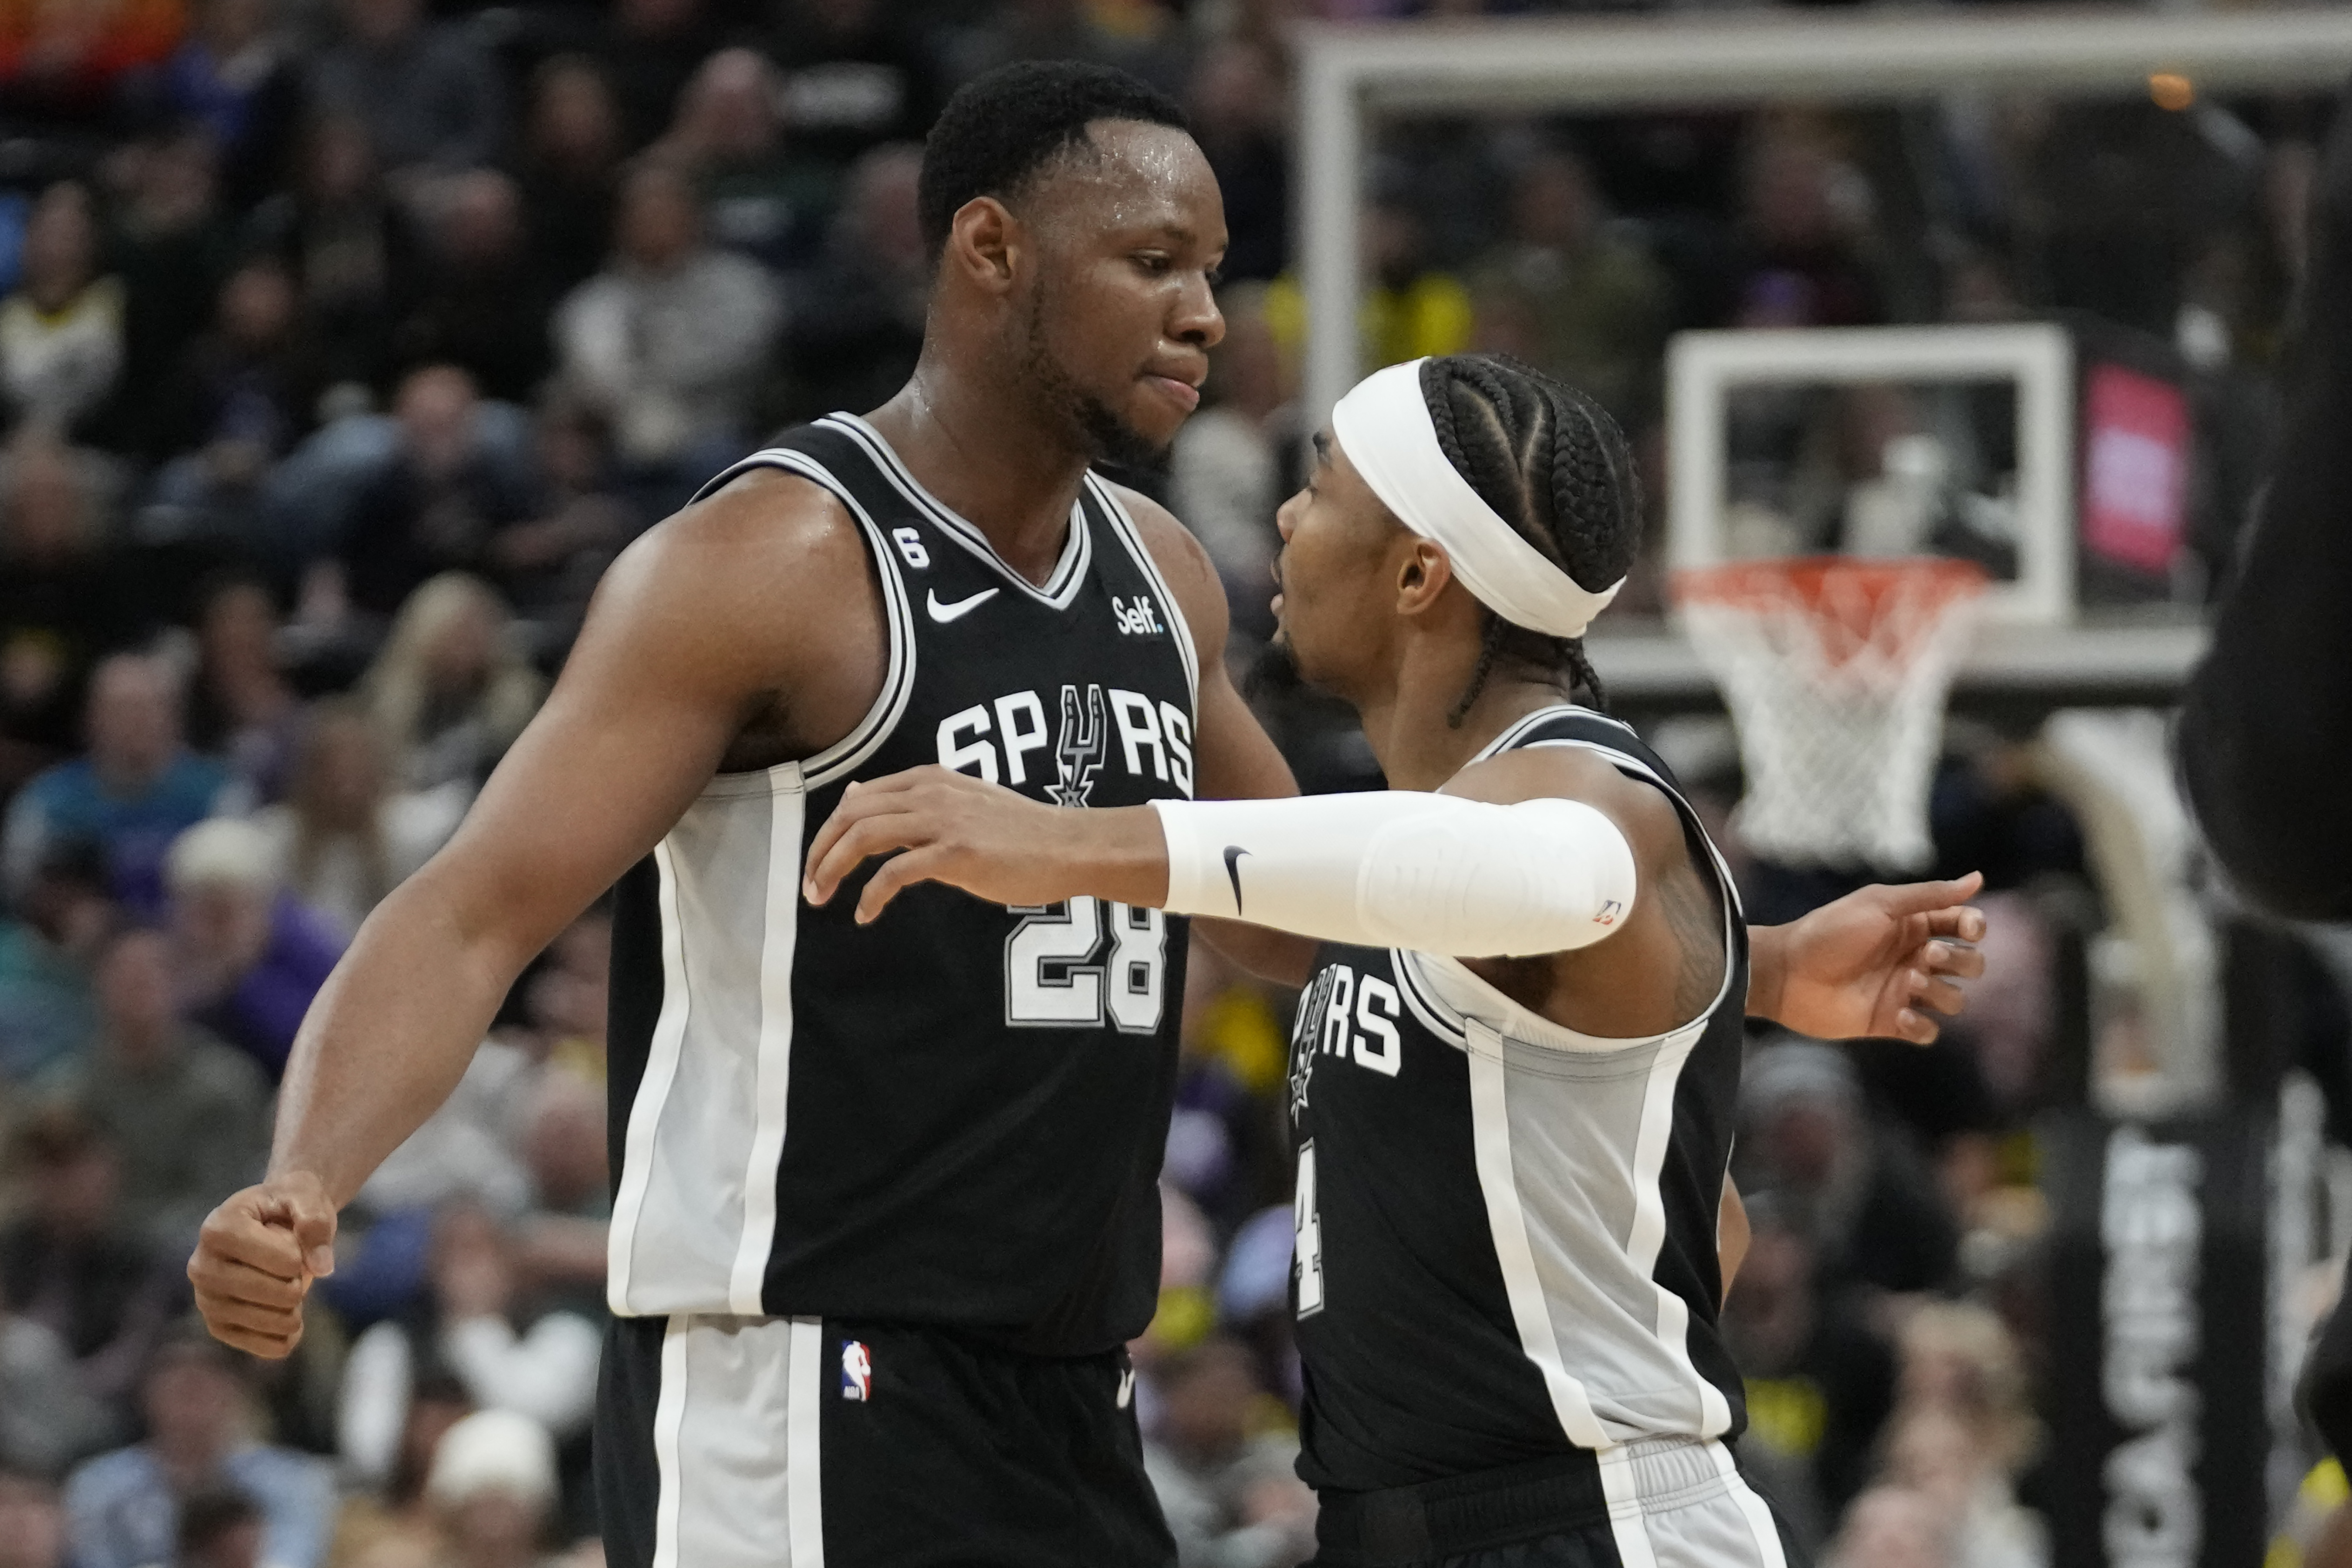 Charles Bassey and Devonte Graham of the San Antonio Spurs celebrate during a game against the Utah Jazz, Tuesday, Feb. 28, 2023. (AP Photo/Rick Bowmer)